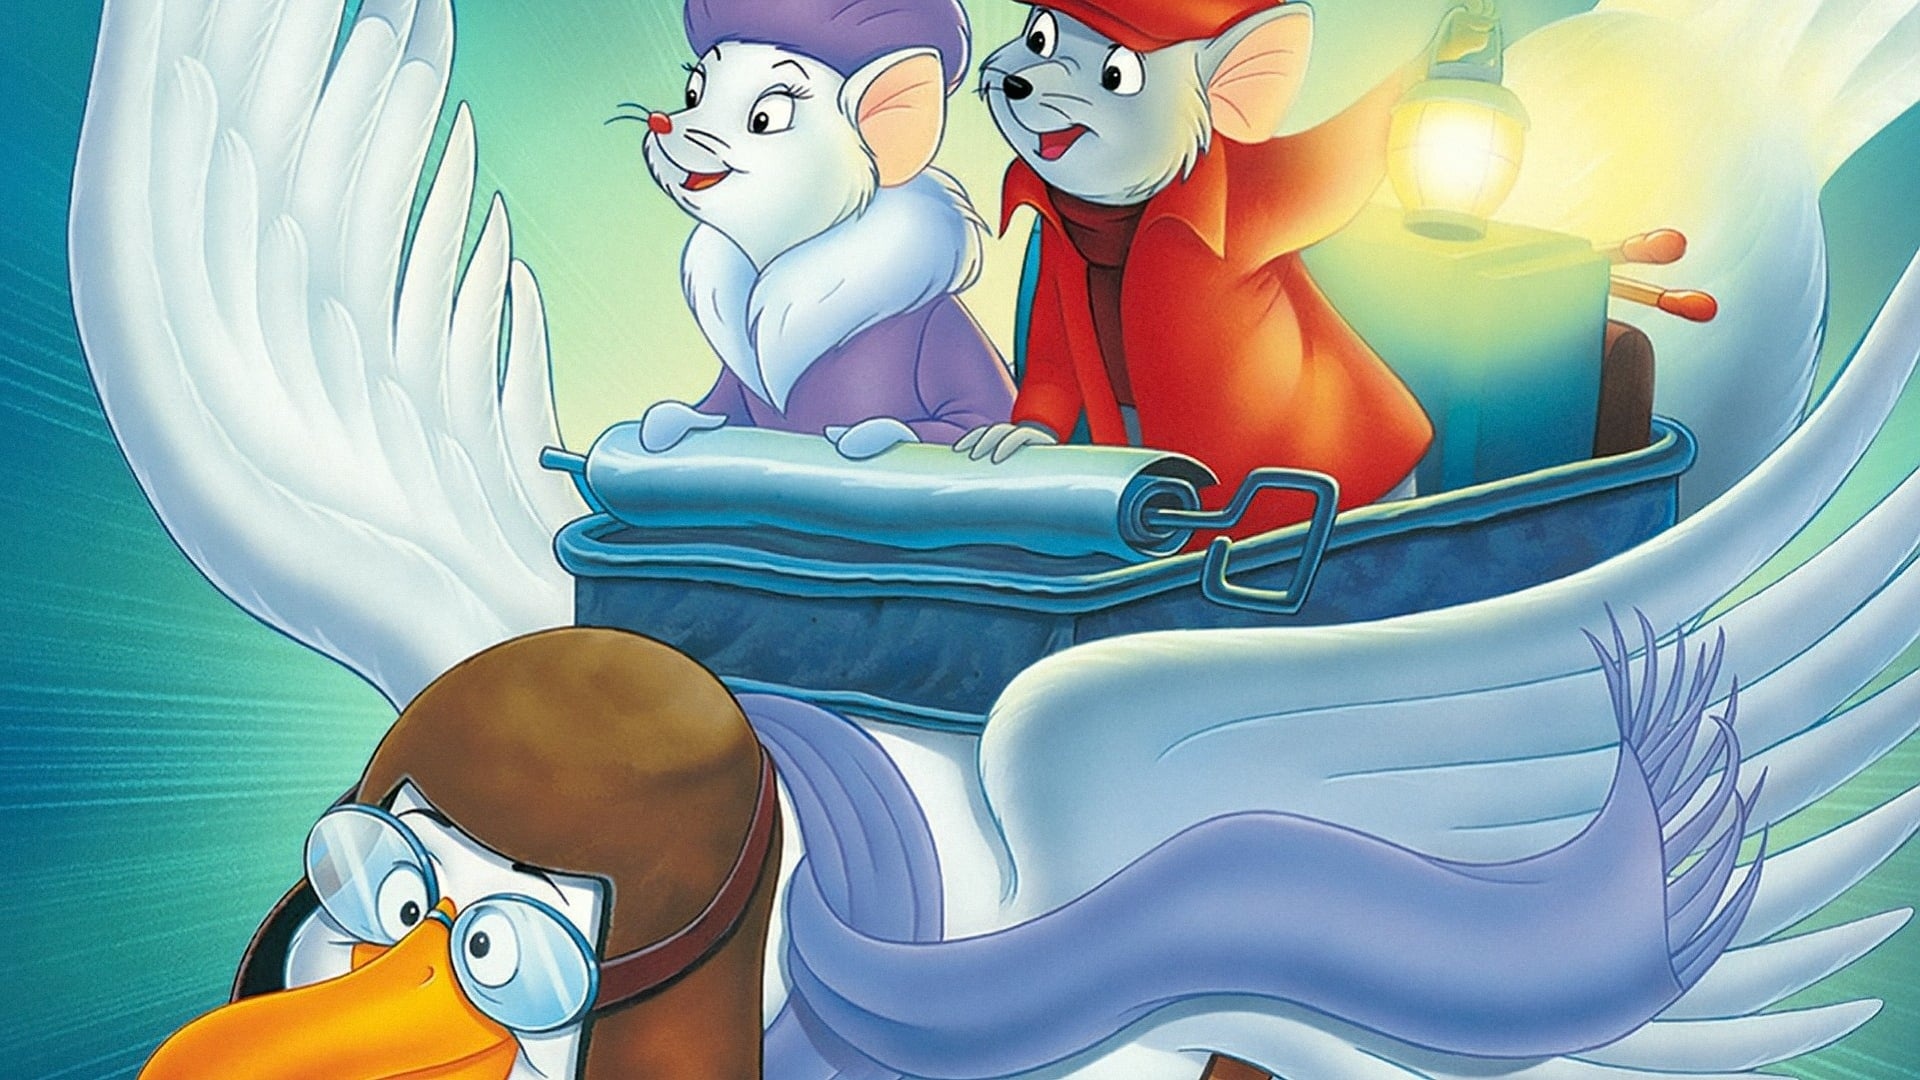 The Rescuers, Animated adventure, Brave protagonists, Heartwarming tale, 1920x1080 Full HD Desktop